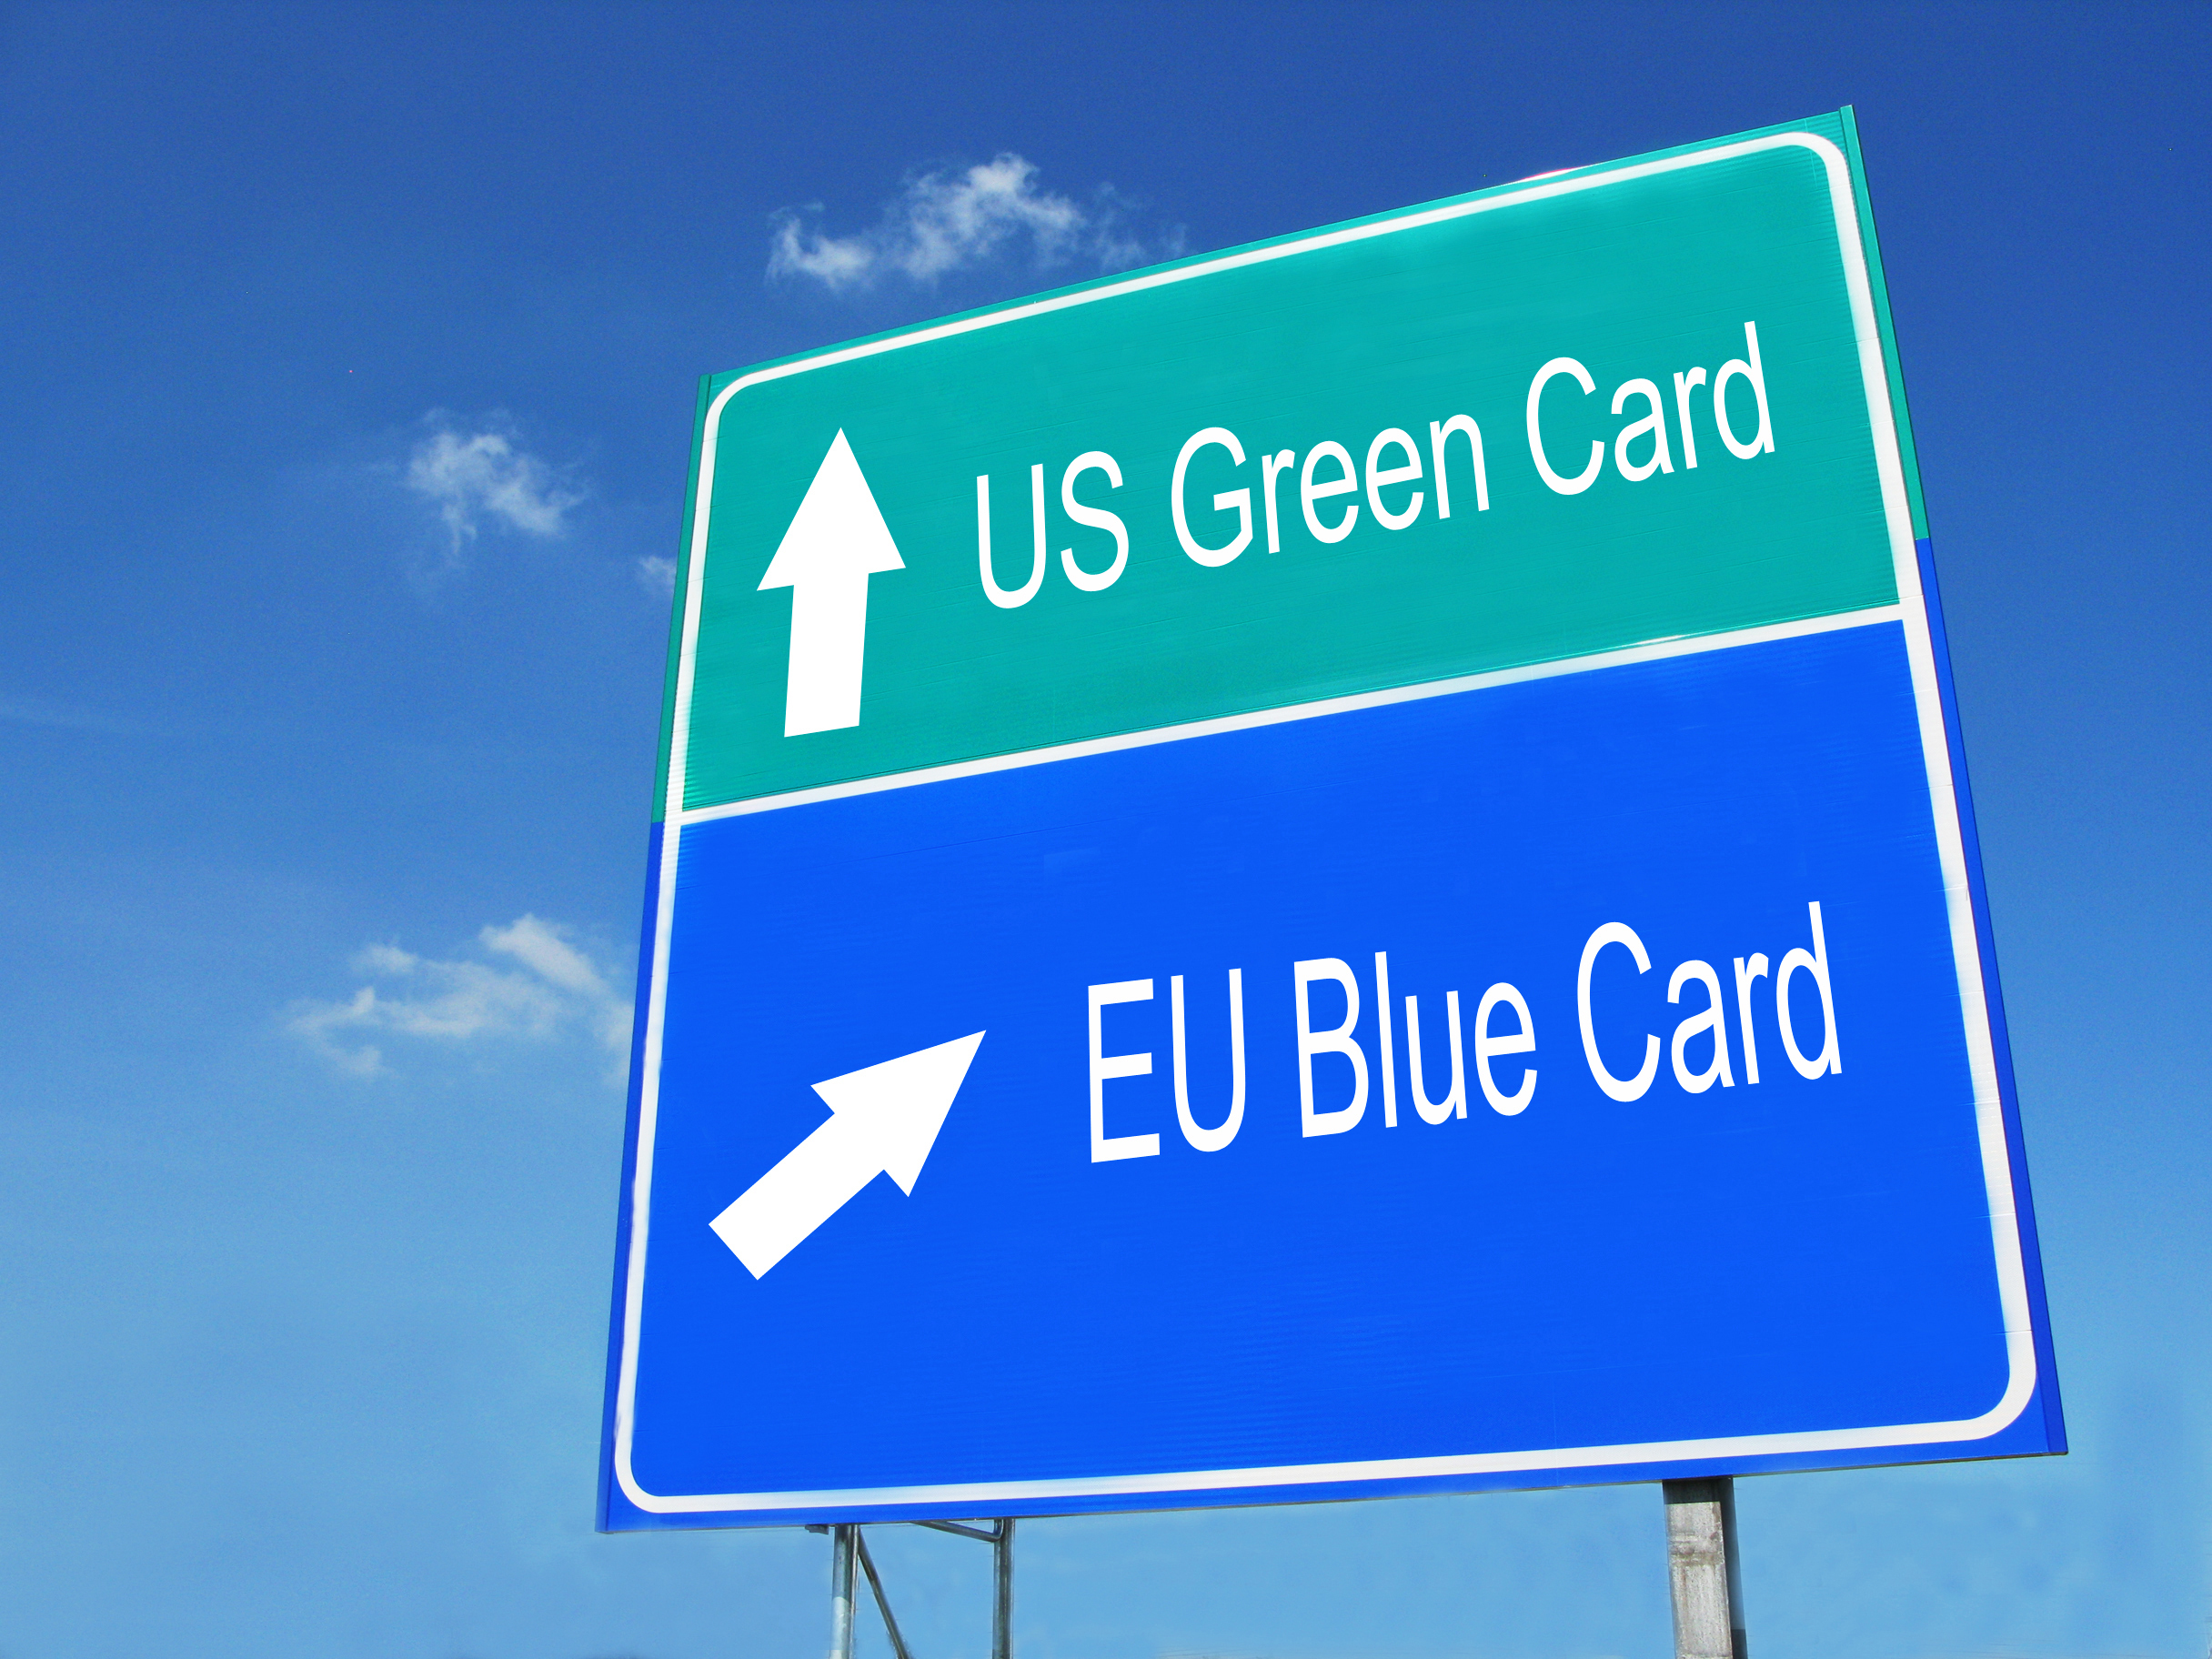 New Blue Card: Europe wants to attract more talent